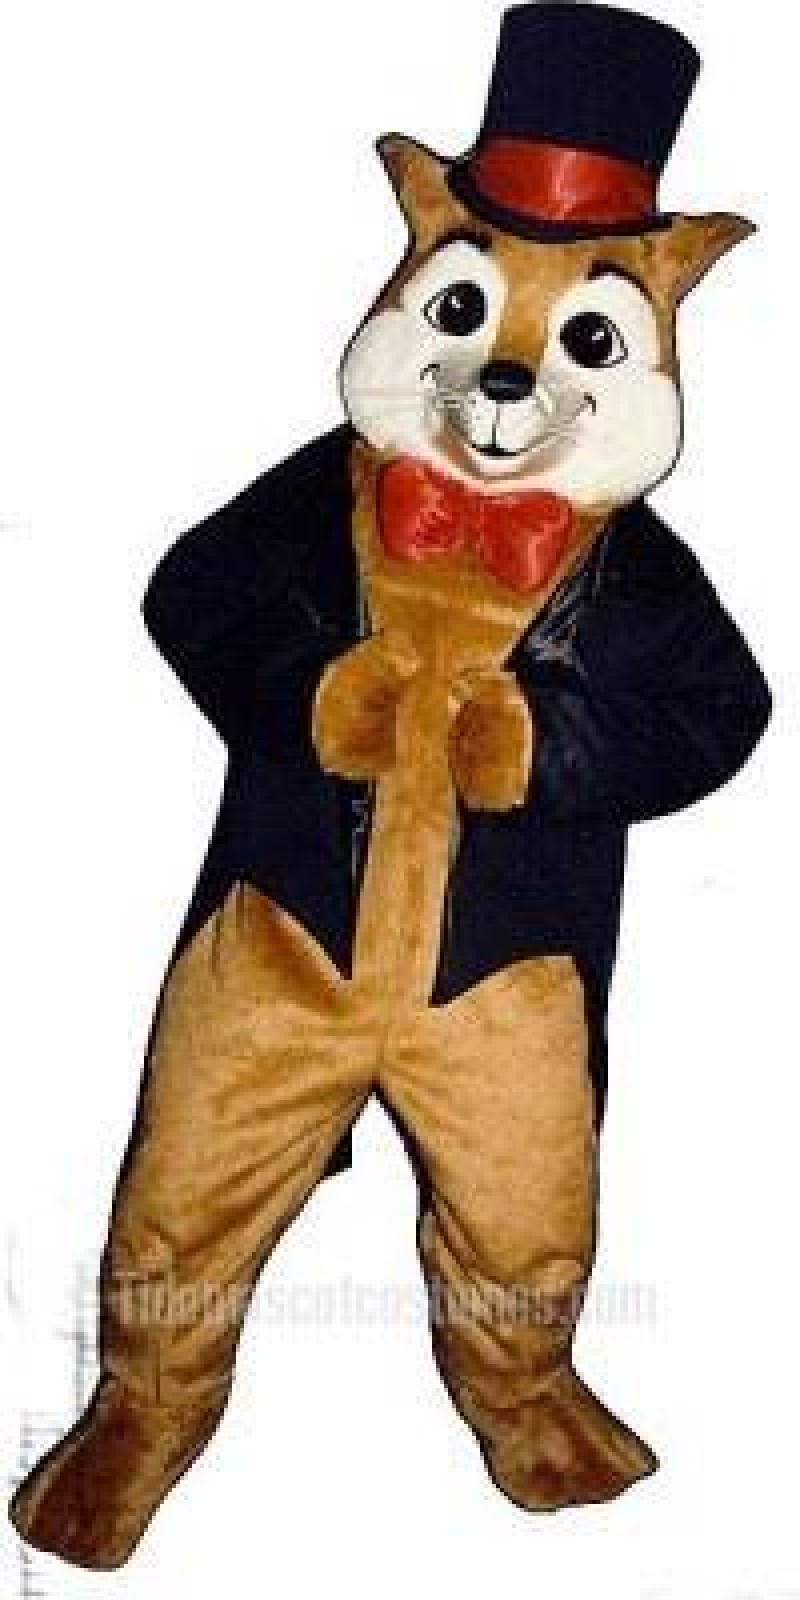 Cute Sly Fox with Hat, Jacket & Bowtie Mascot Costume